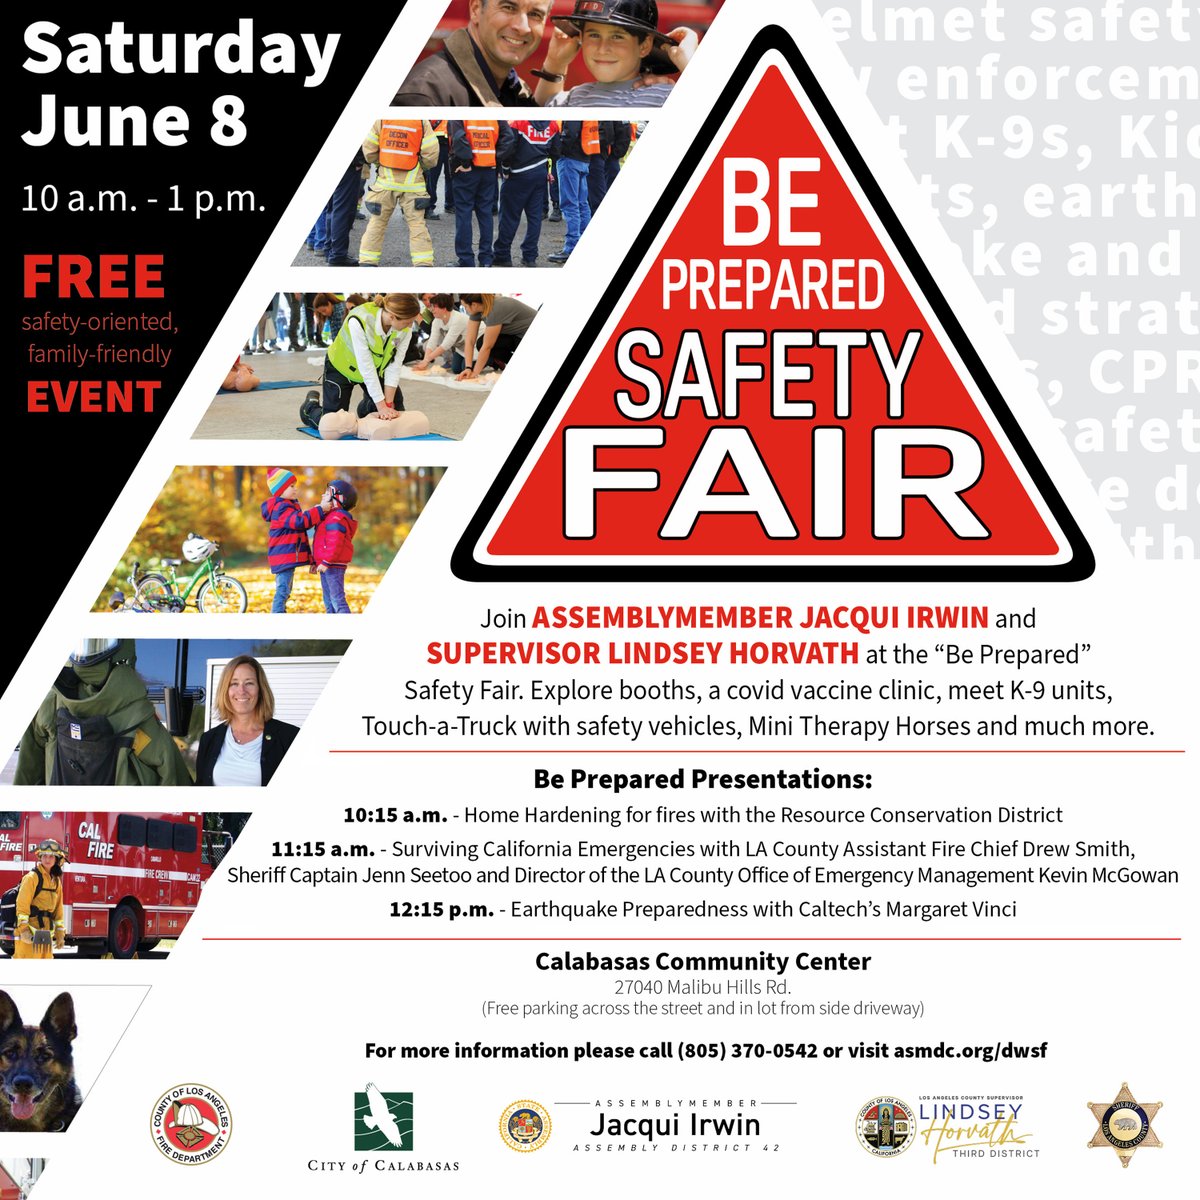 Everything from surviving earthquakes to making your home fire-safe. Come to the Be Prepared Safety Fair Saturday, June 8th at 10:00am at the Calabasas Community Center. Experts will be there to answer all your questions.